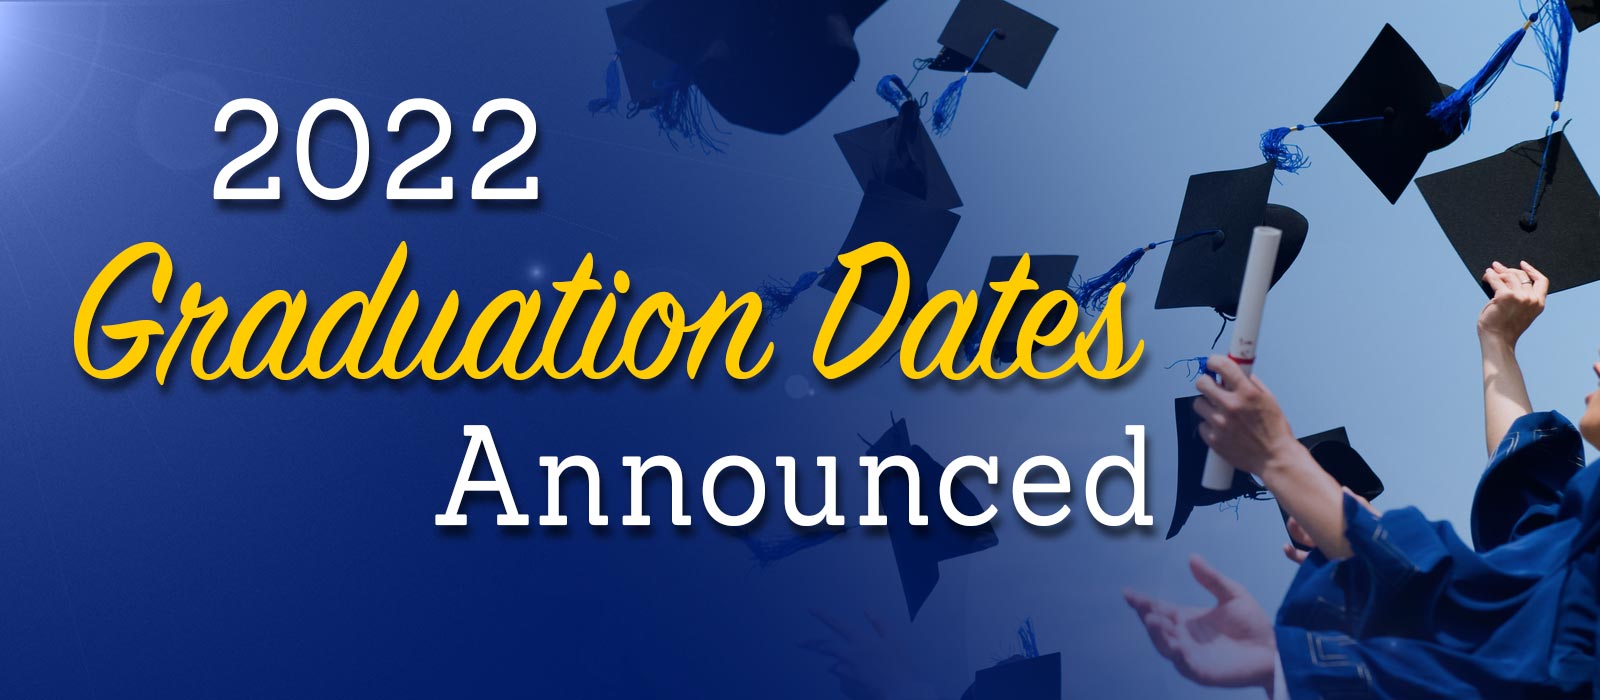 Graduation dates for 2022 announced Northside Independent School District